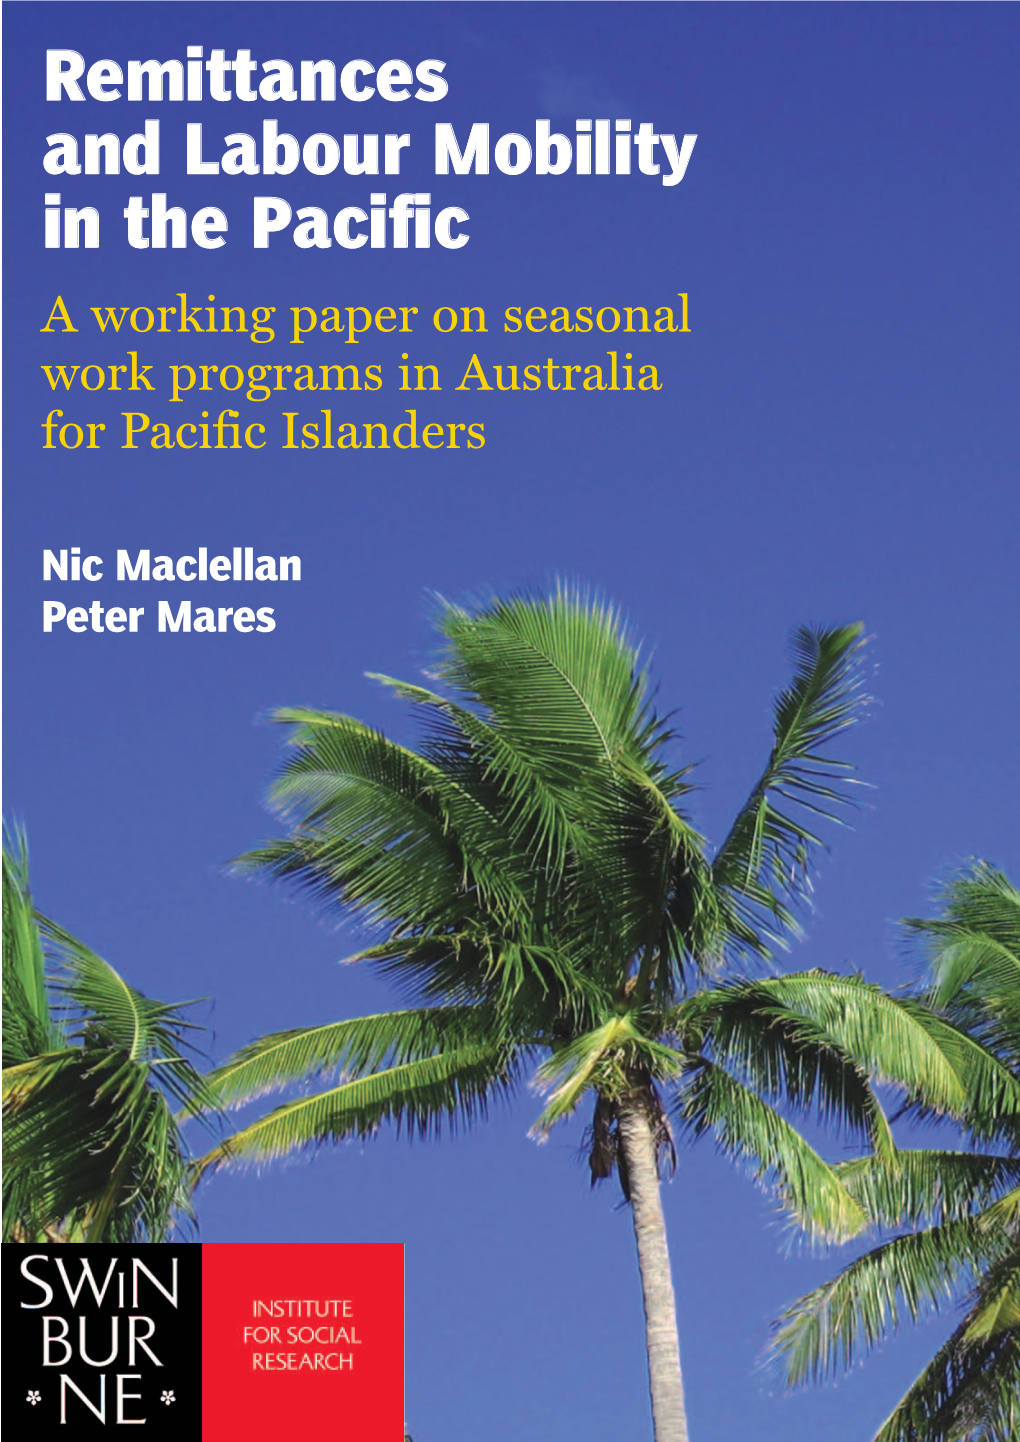 Remittances and Labour Mobility in the Pacific a Working Paper on Seasonal Work Programs in Australia for Pacific Islanders